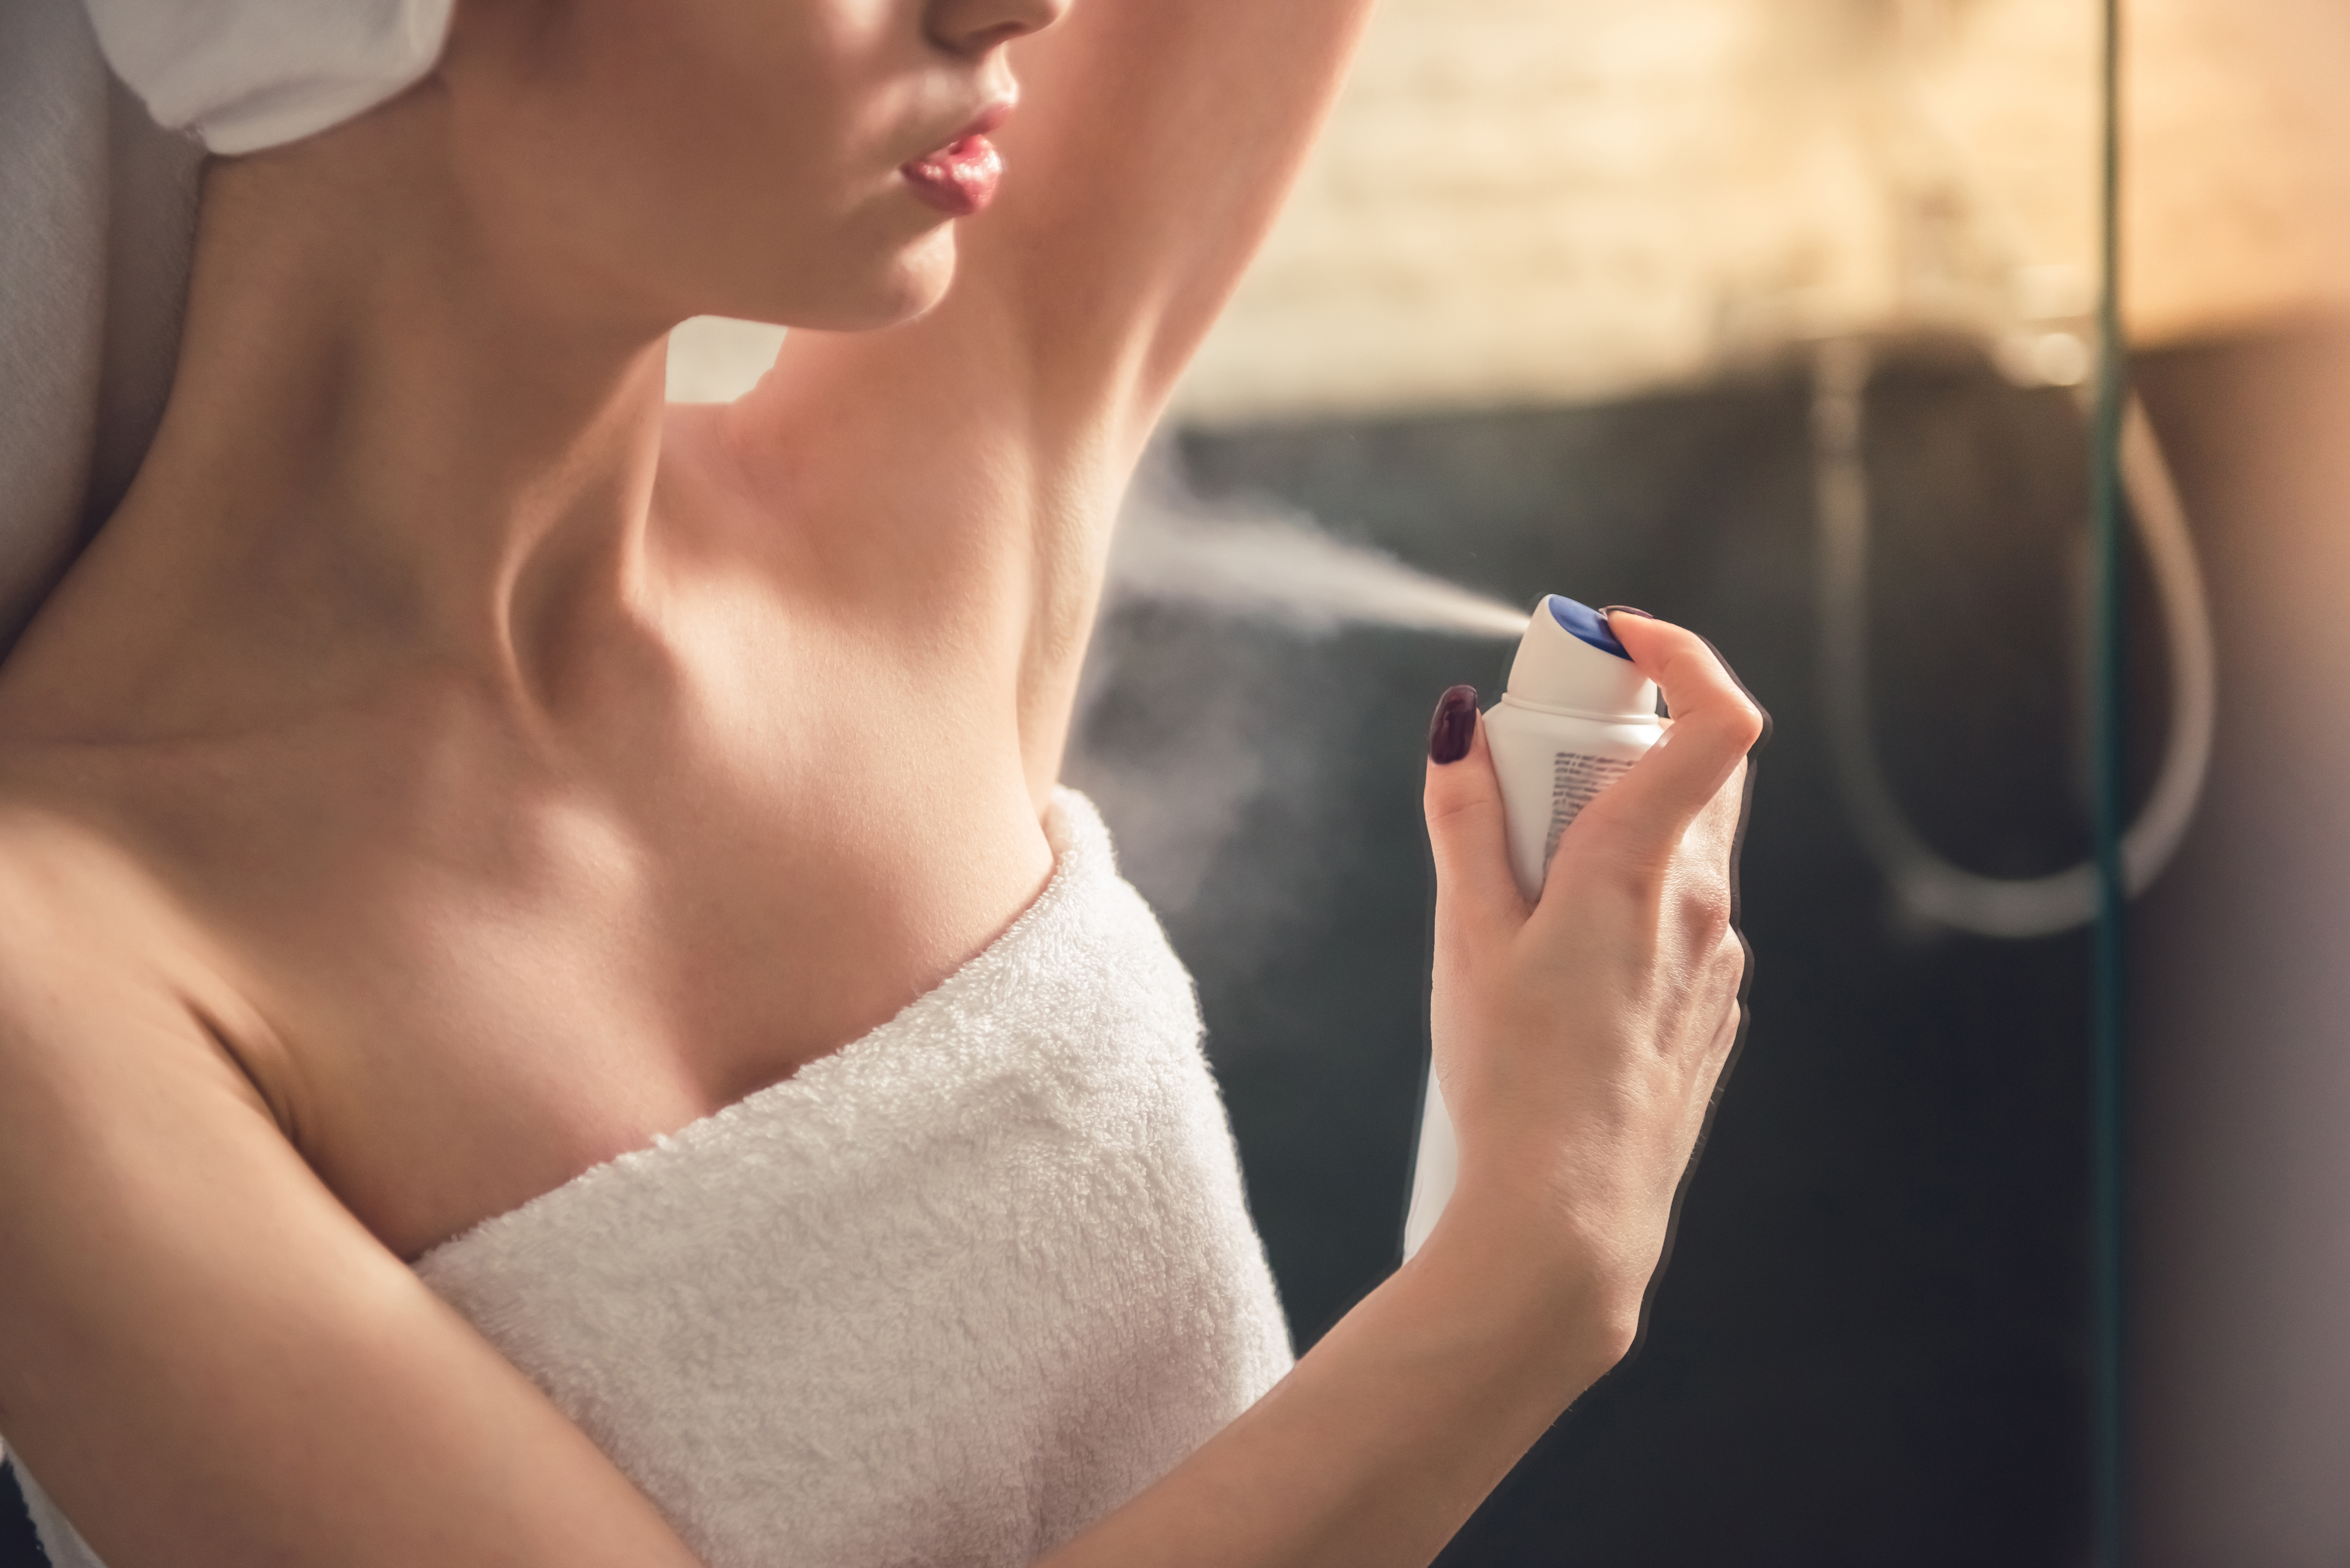 Woman spraying deodorant on her underarms | Source: Shutterstock